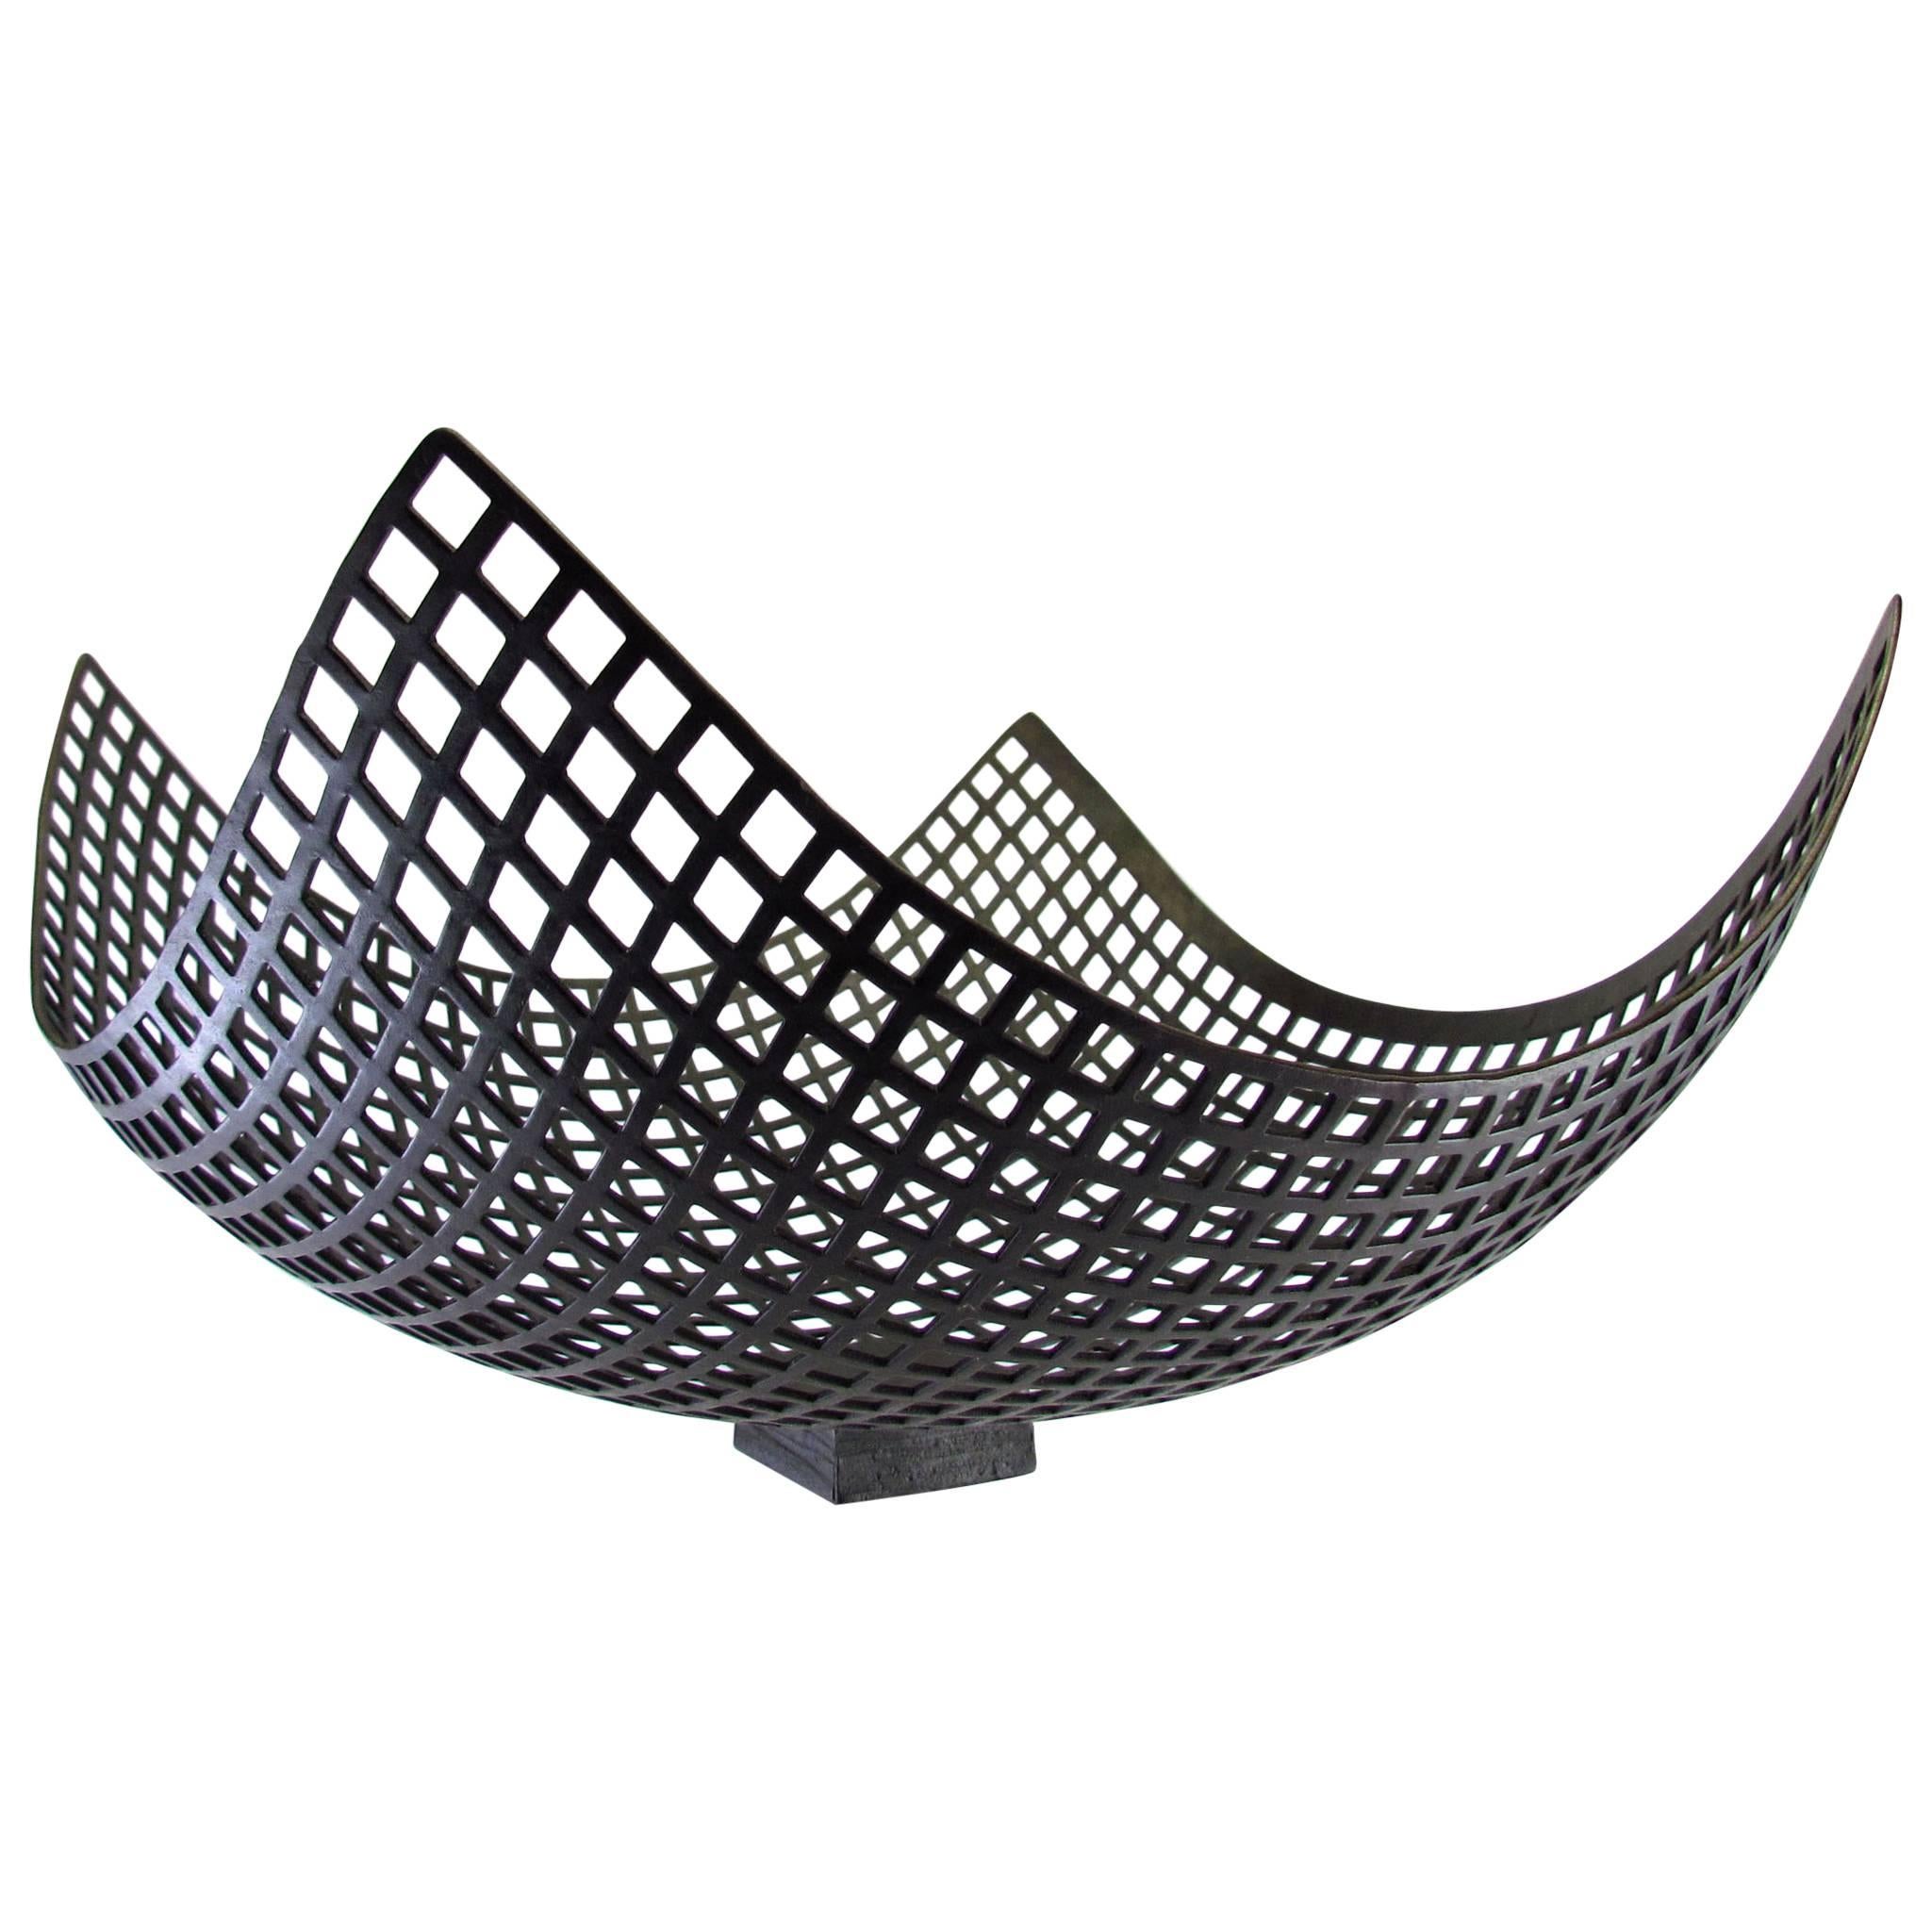 Hand Wrought Iron Centerpiece Bowl by Lars Larsson, Sweden, circa 1970s